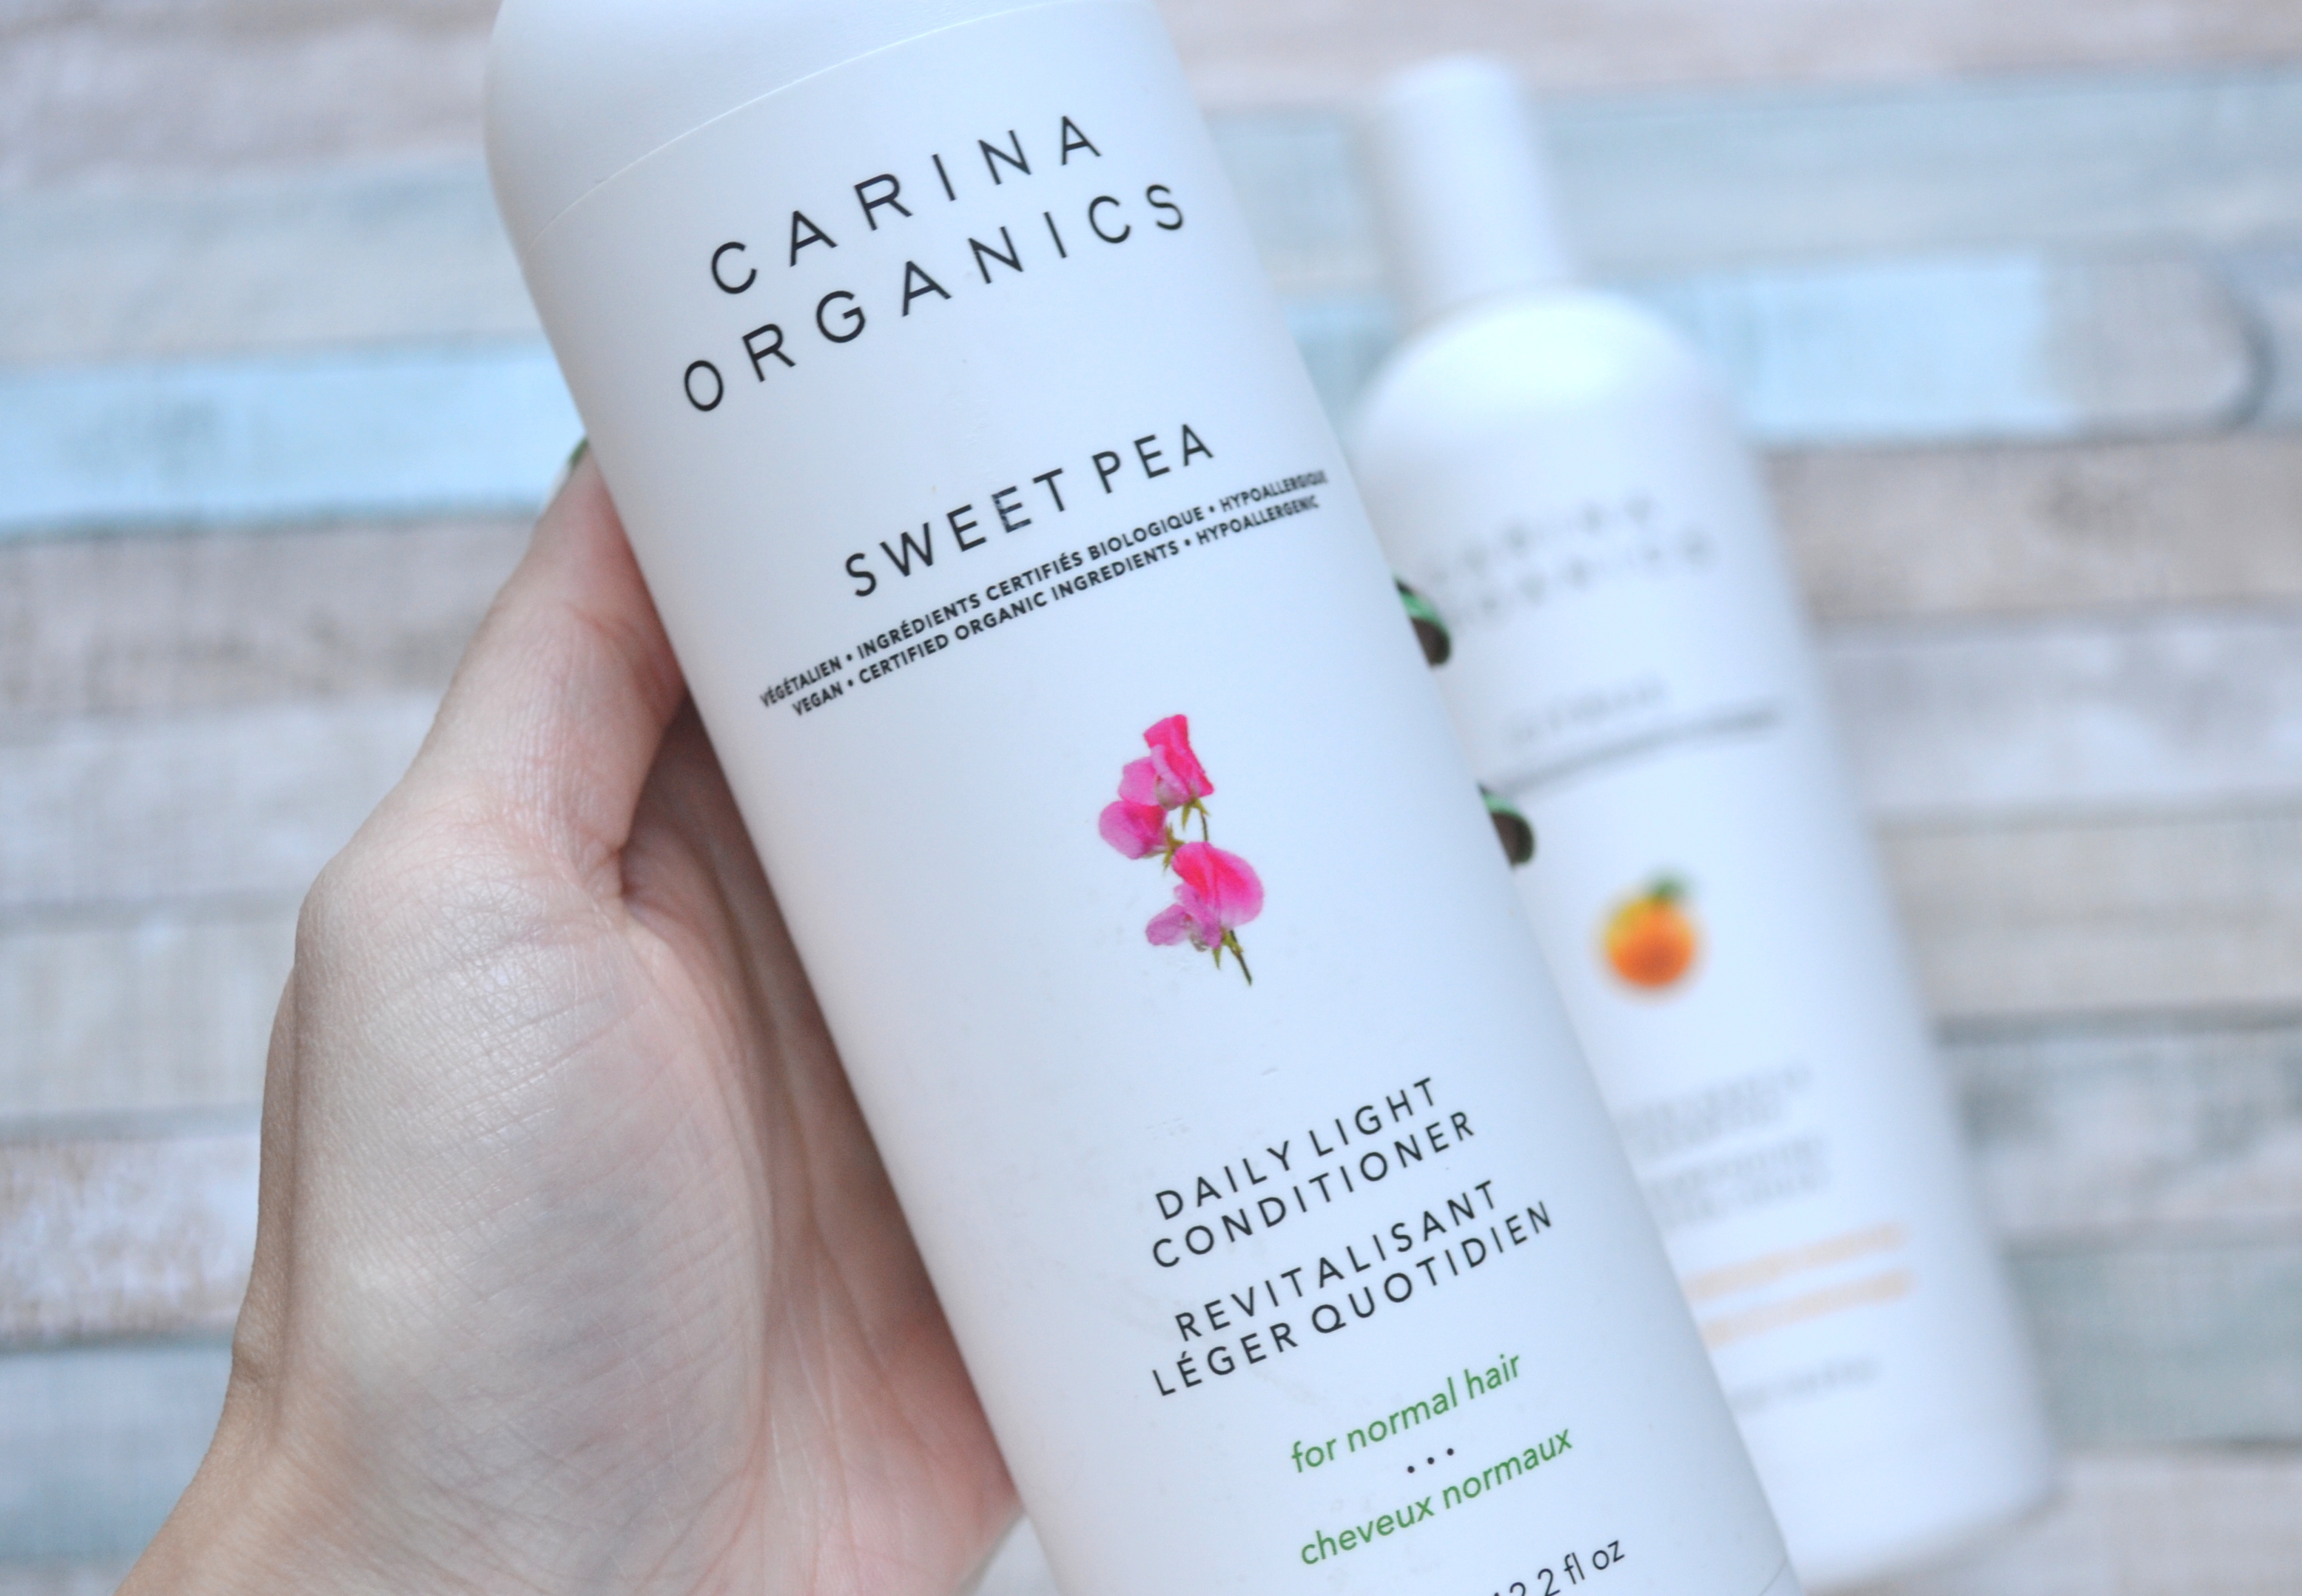 Sjældent Gentleman underjordisk HAIR | Carina Organics Citrus Shampoo and Sweet Pea Conditioner | Cosmetic  Proof | Vancouver beauty, nail art and lifestyle blog